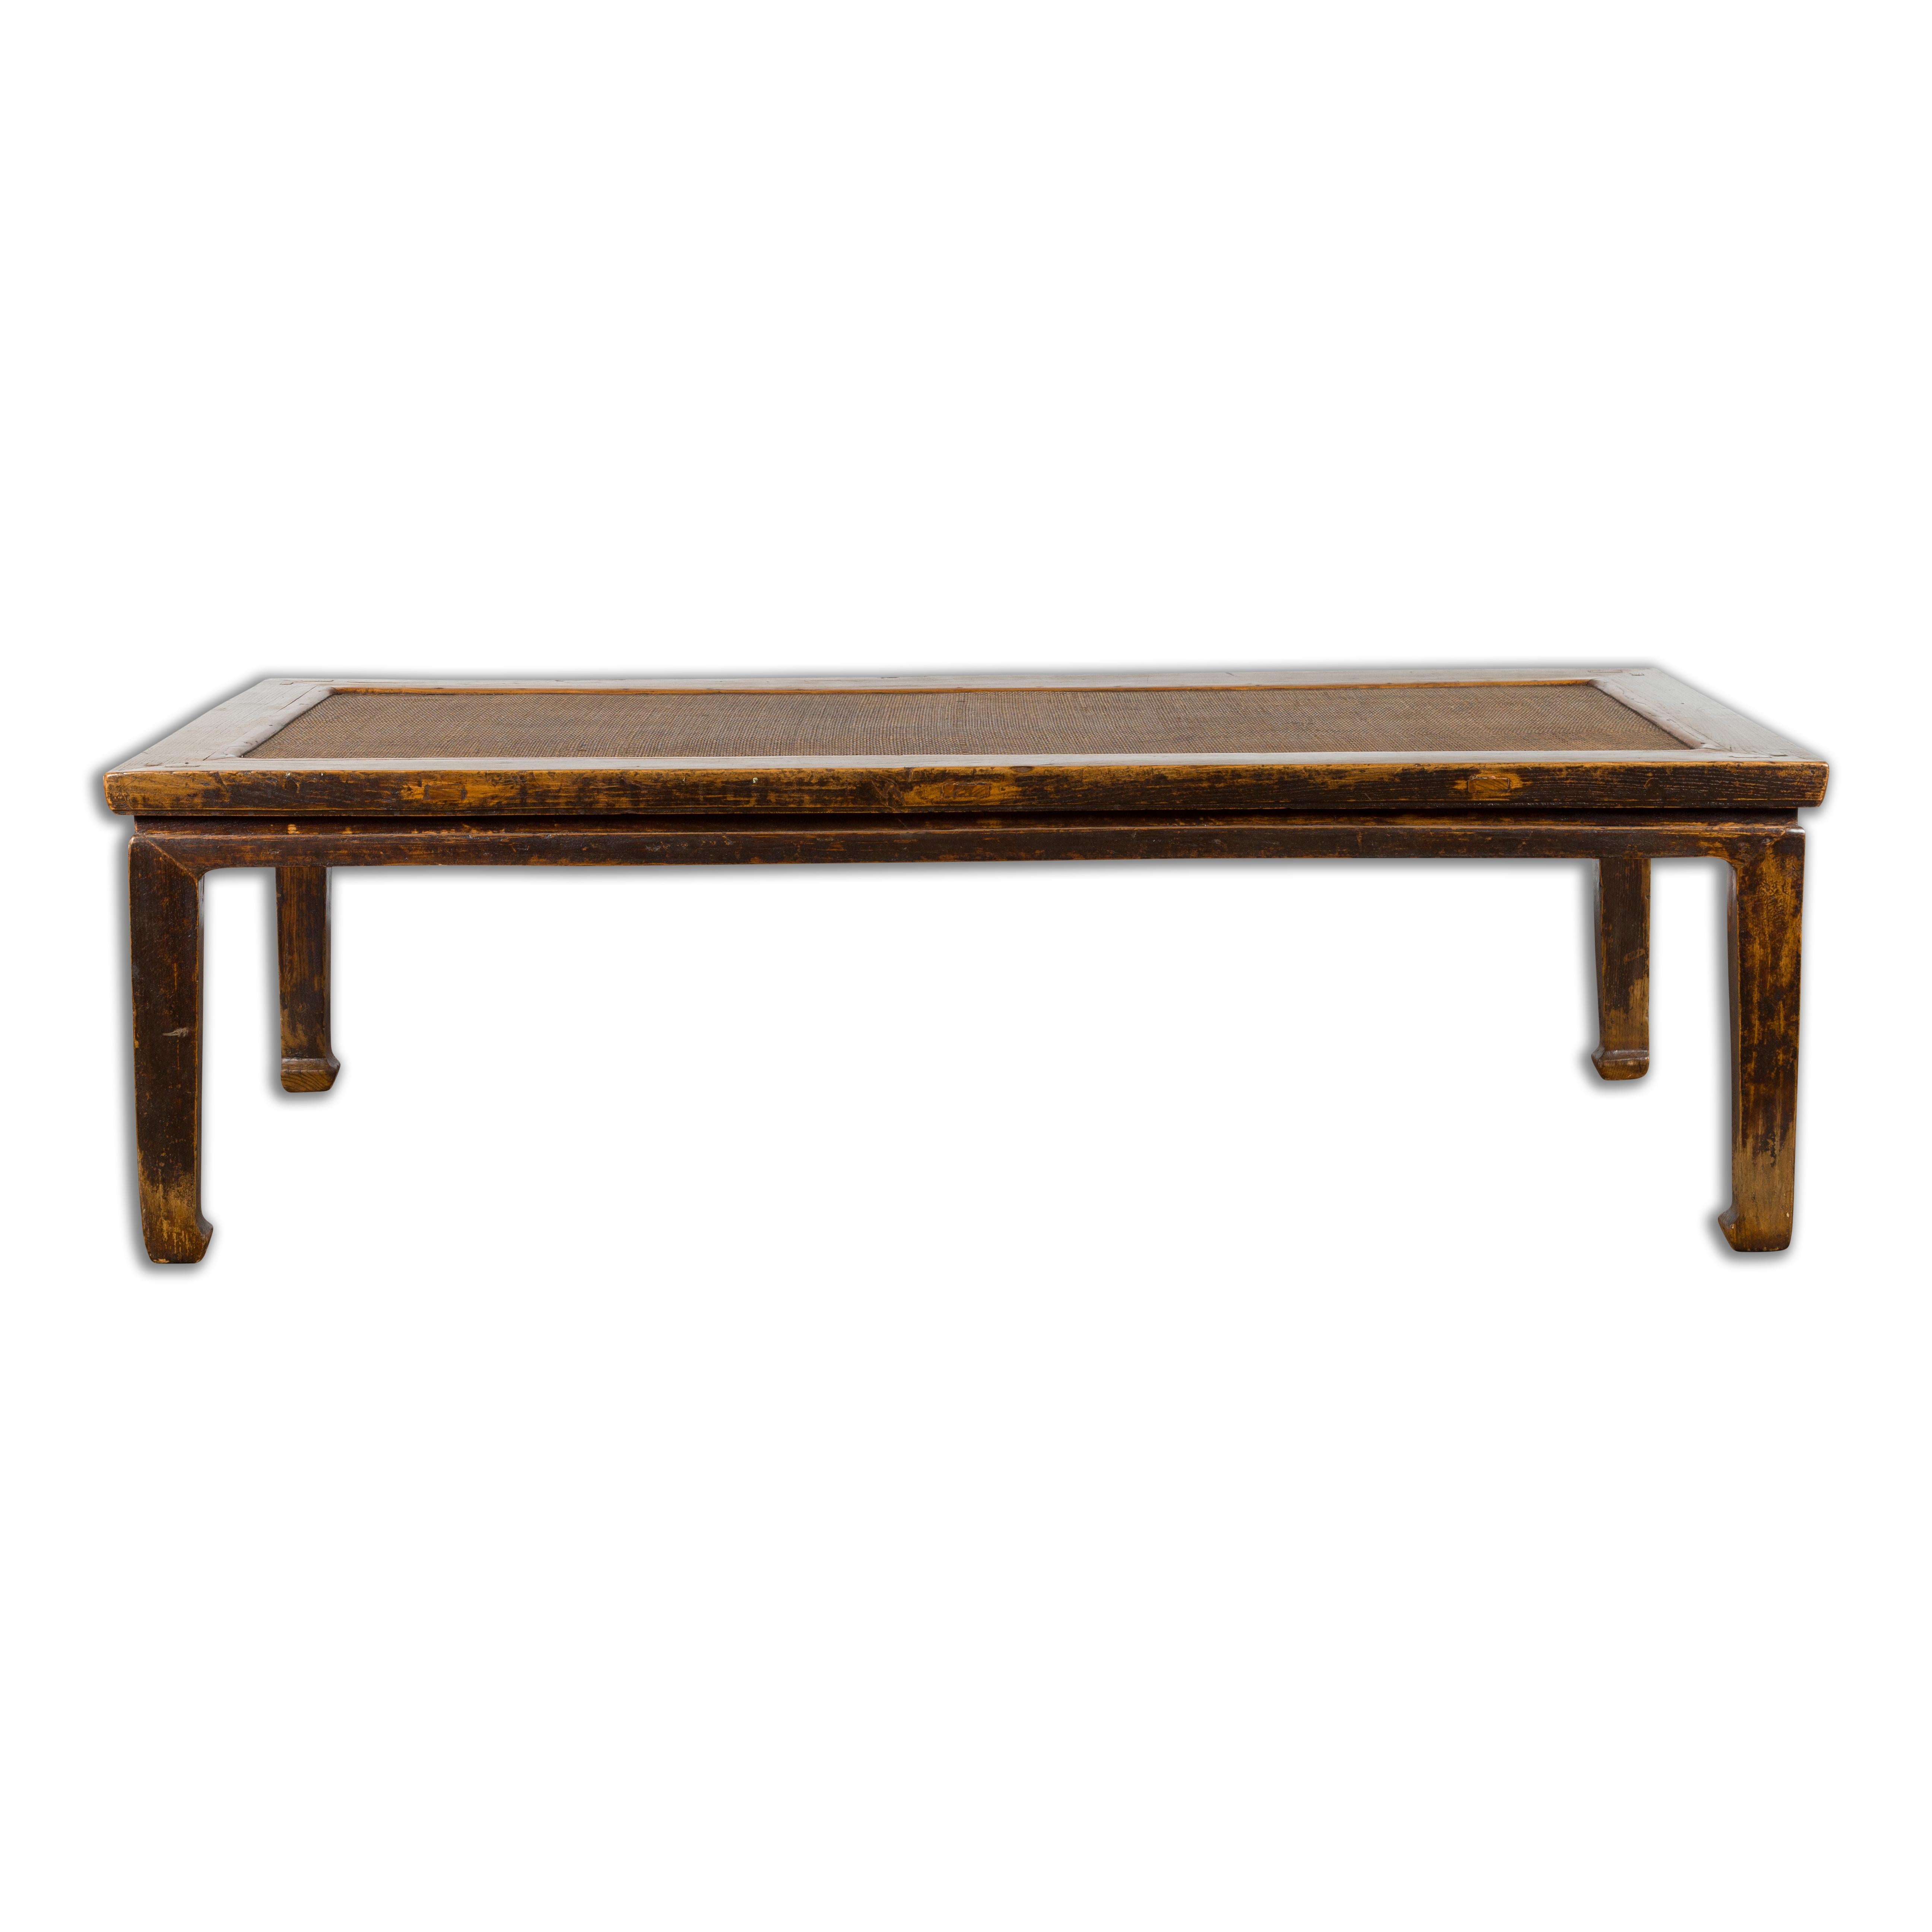 Chinese Qing Dynasty 19th Century Distressed Coffee Table with Woven Rattan Top 11